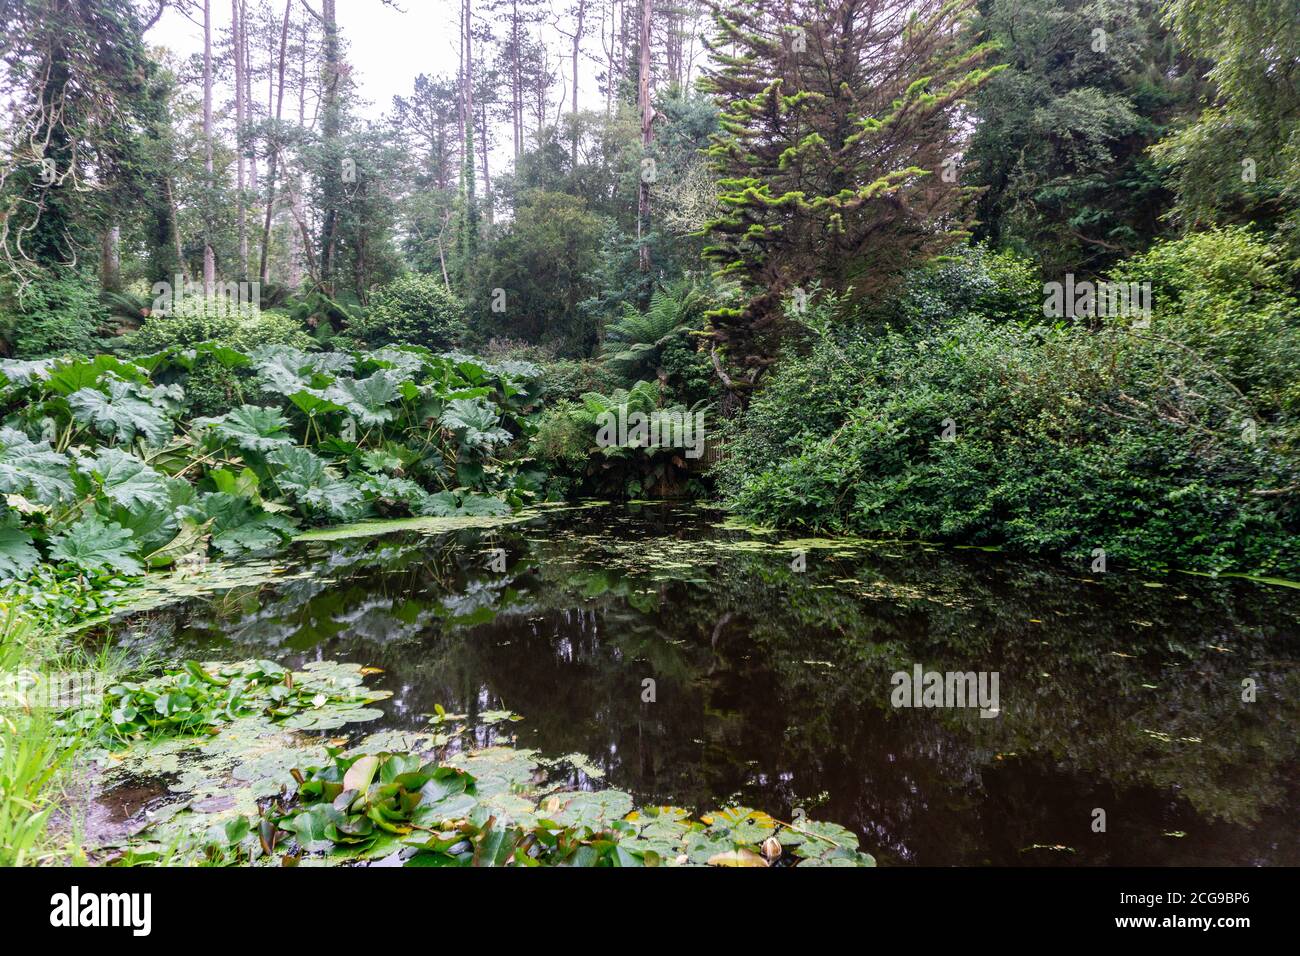 A small lake surrounded by large leafed gunnera plants  in Kells Bay Gardens in Kells, County Kerry, Ireland. Stock Photo